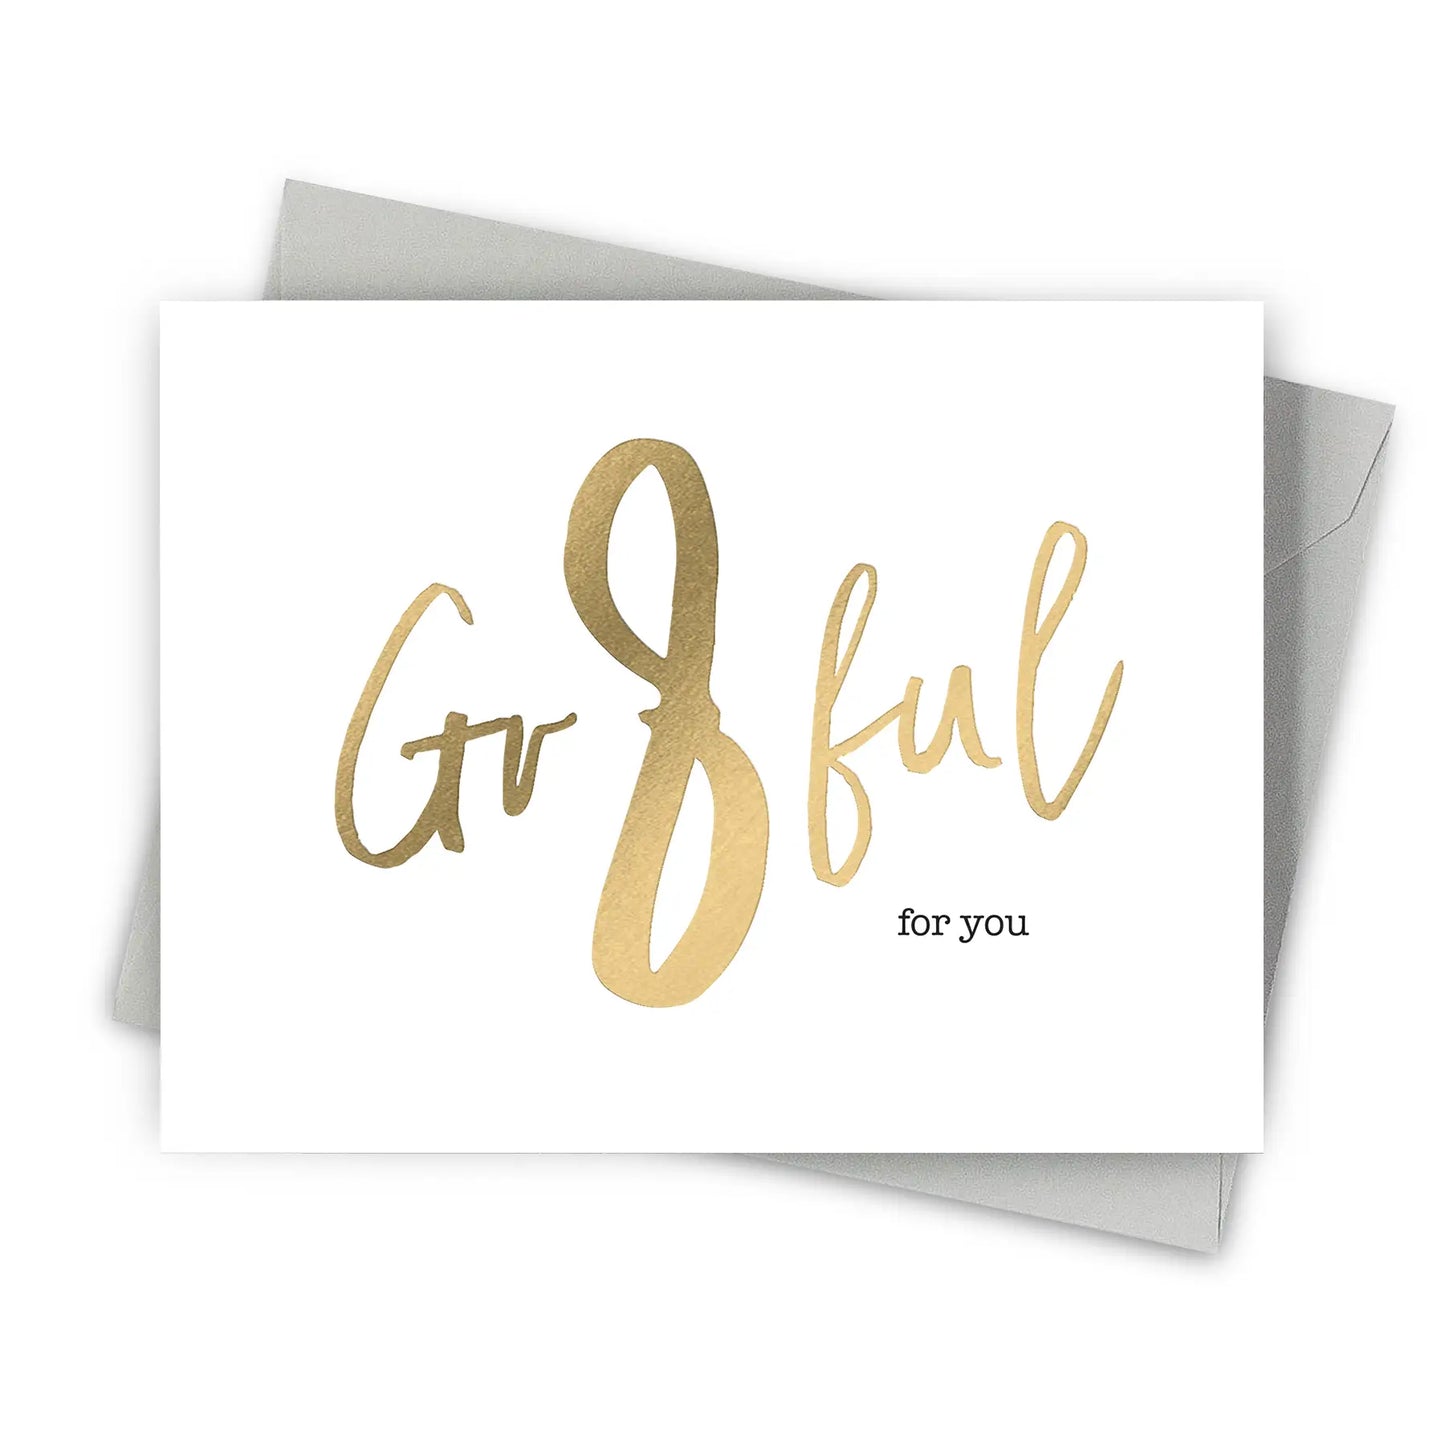 Gr8ful For You Card